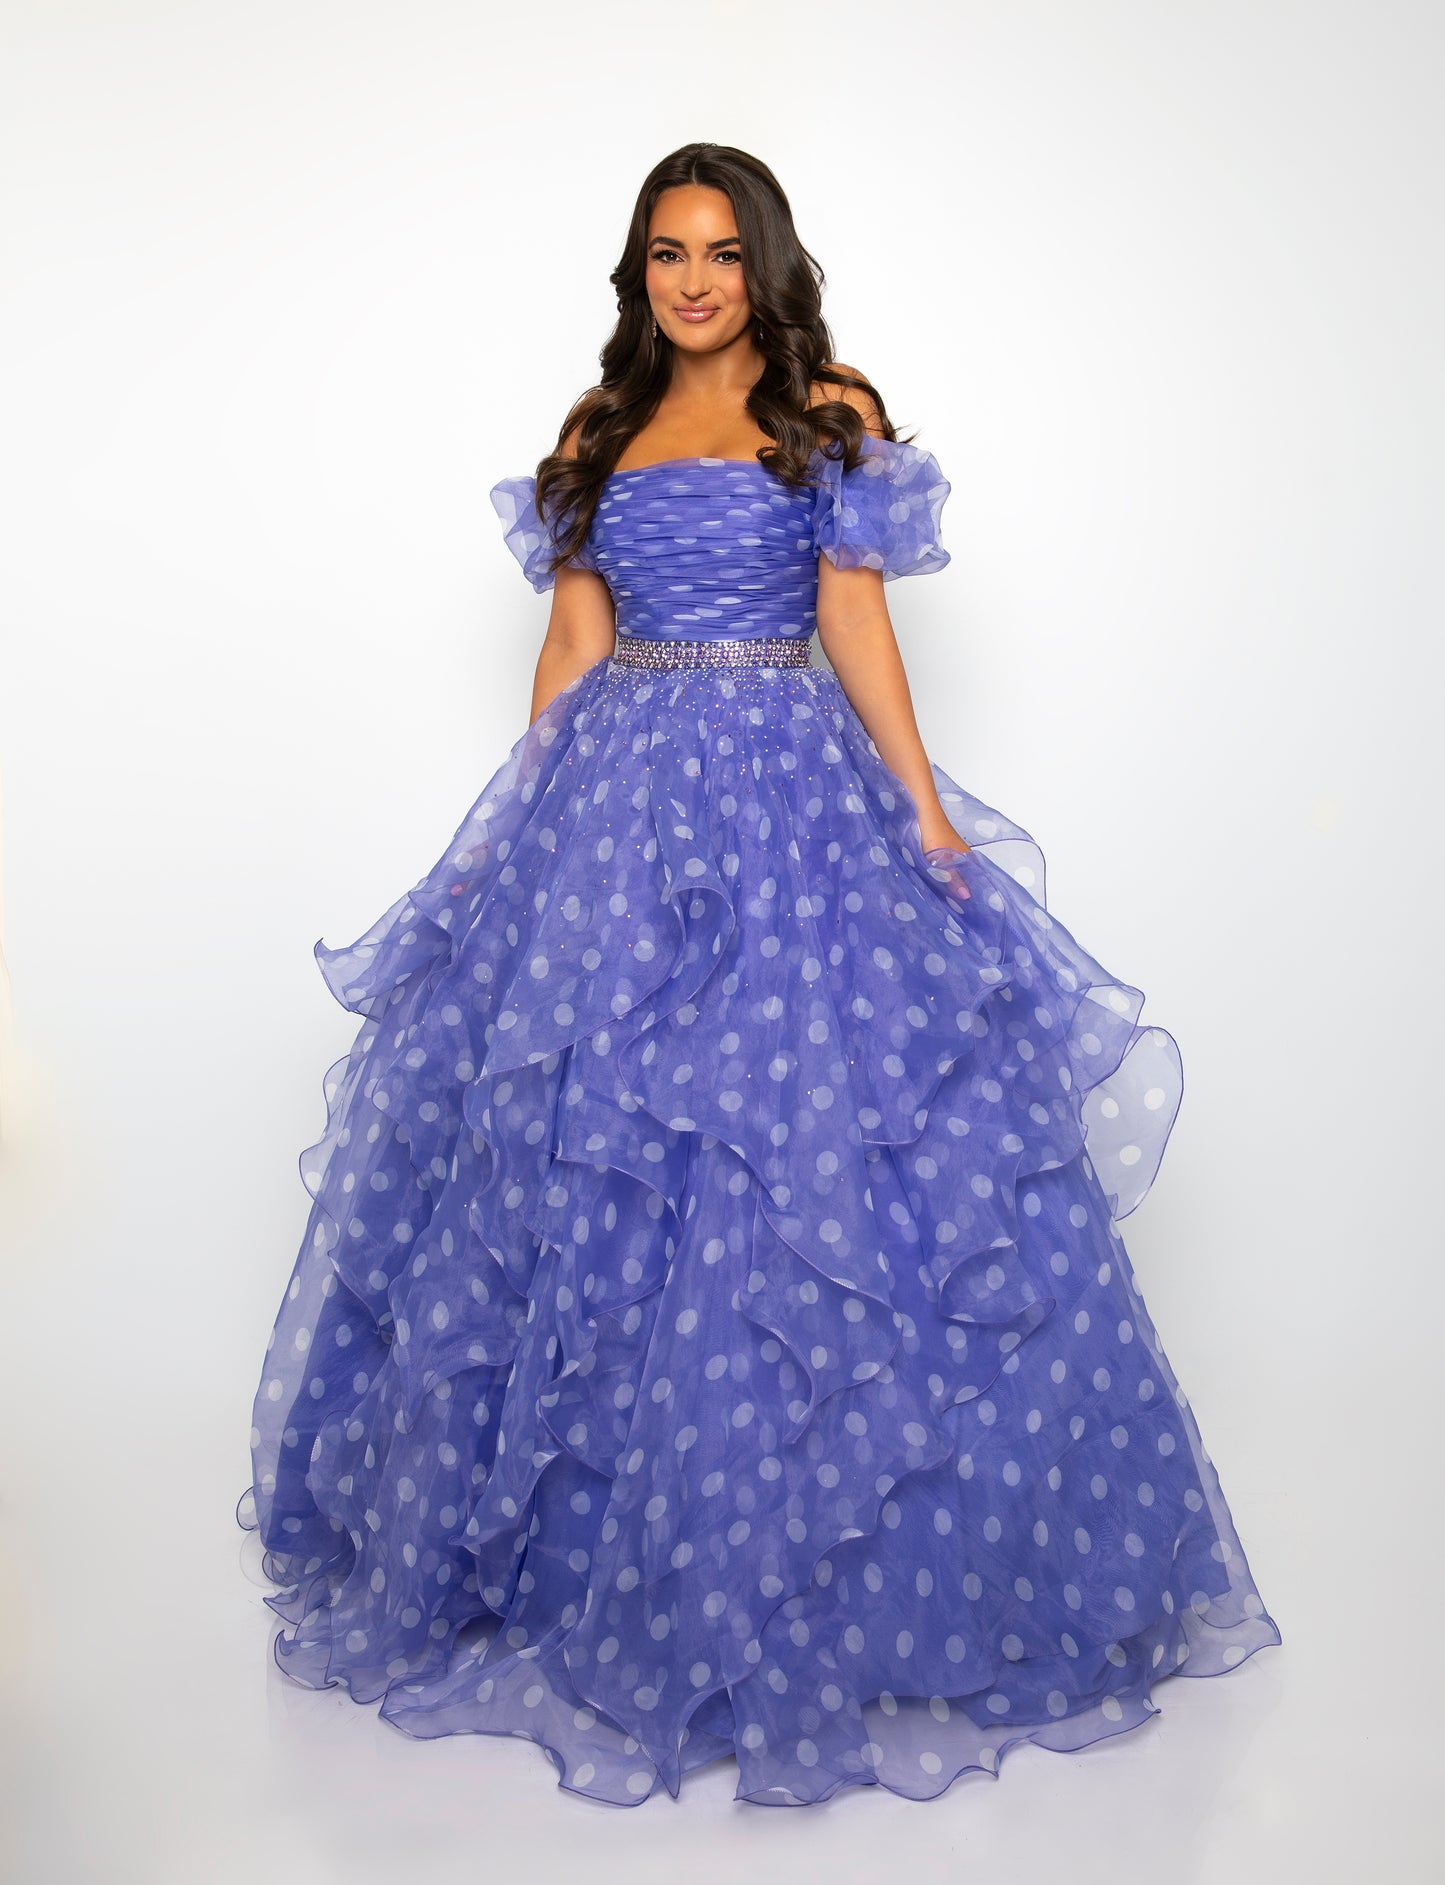 Prom Dresses Long A Line Polka Prom Dress Periwinkle/White